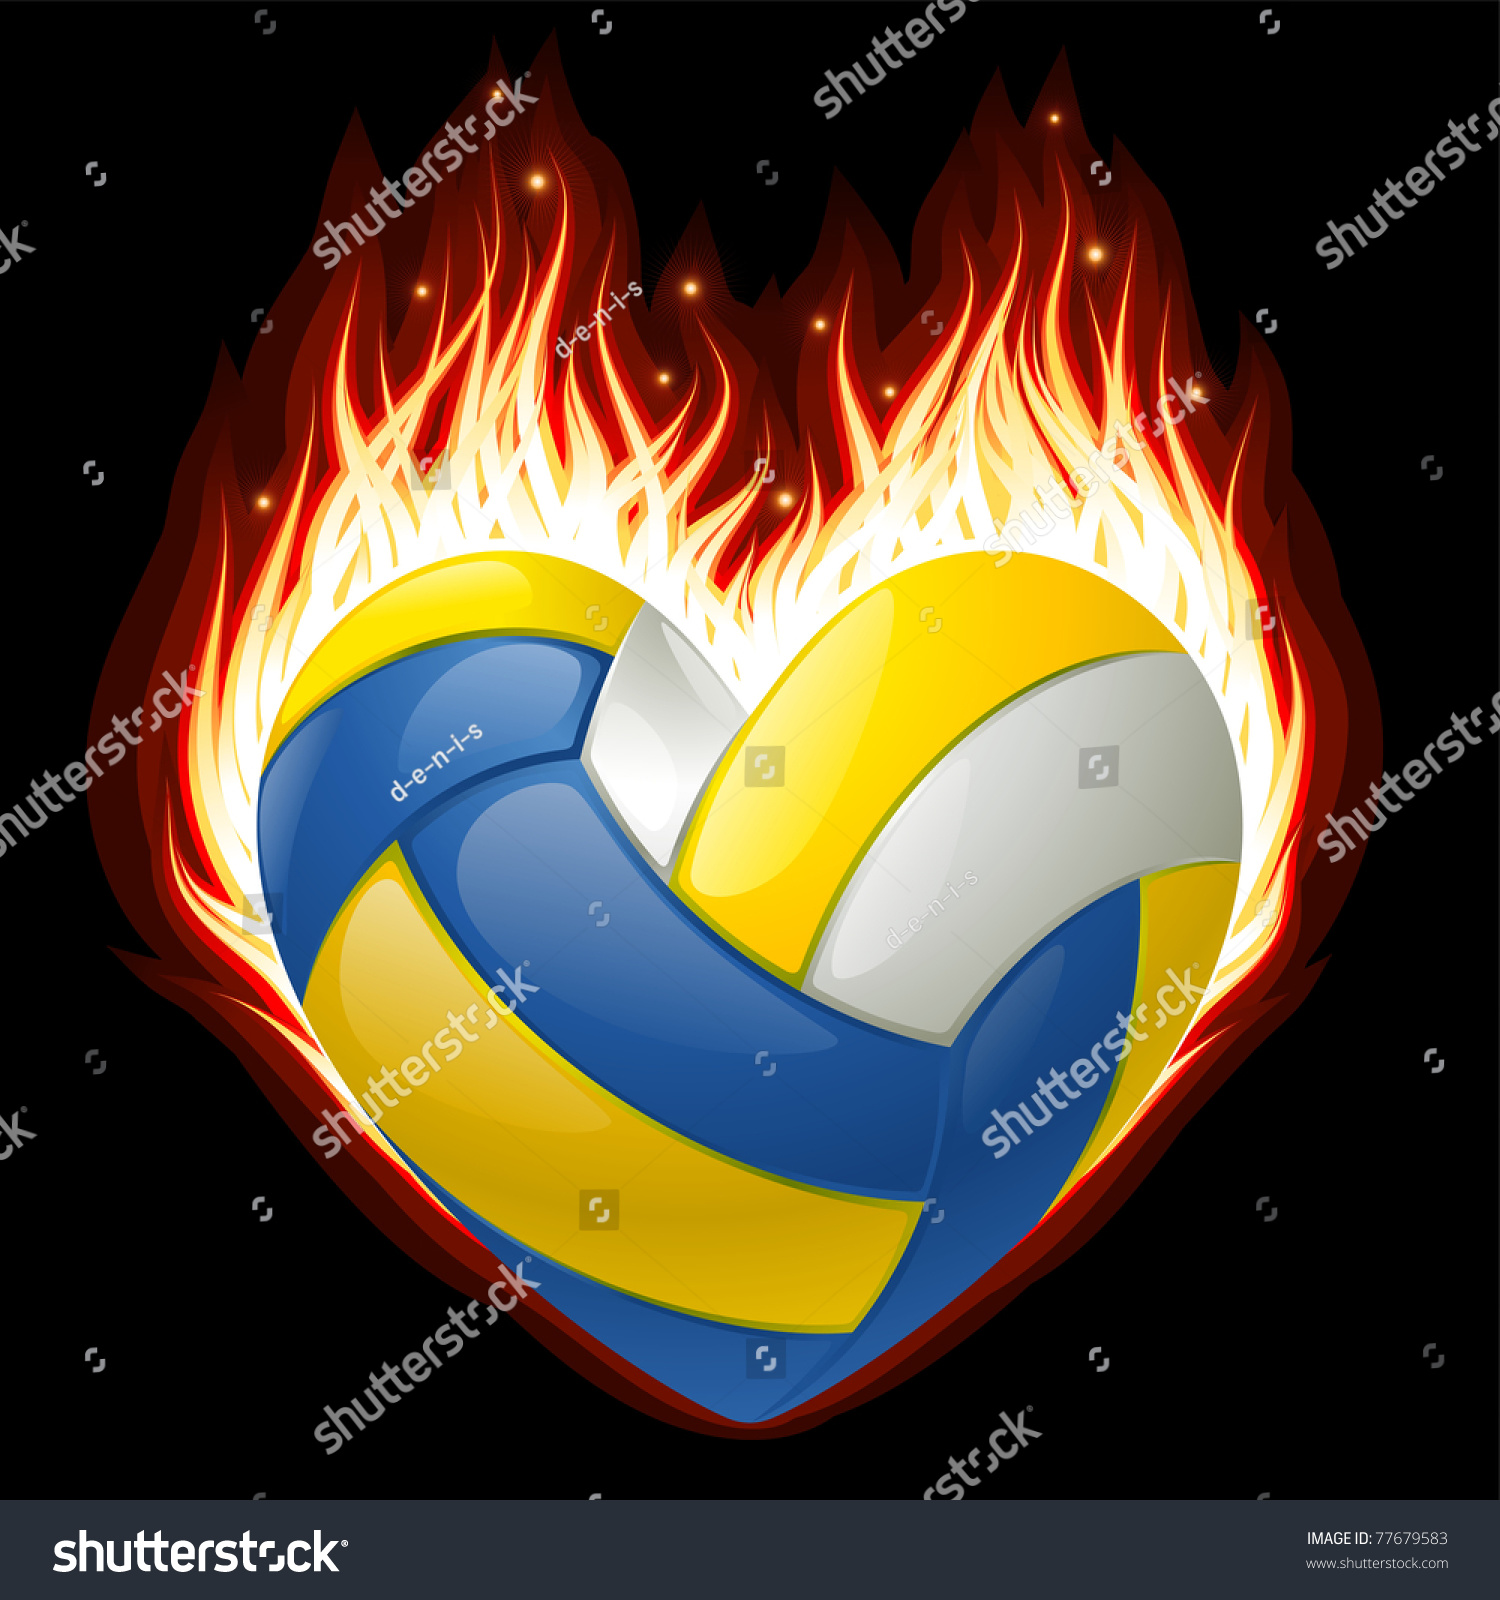 volleyball fire clipart - photo #29